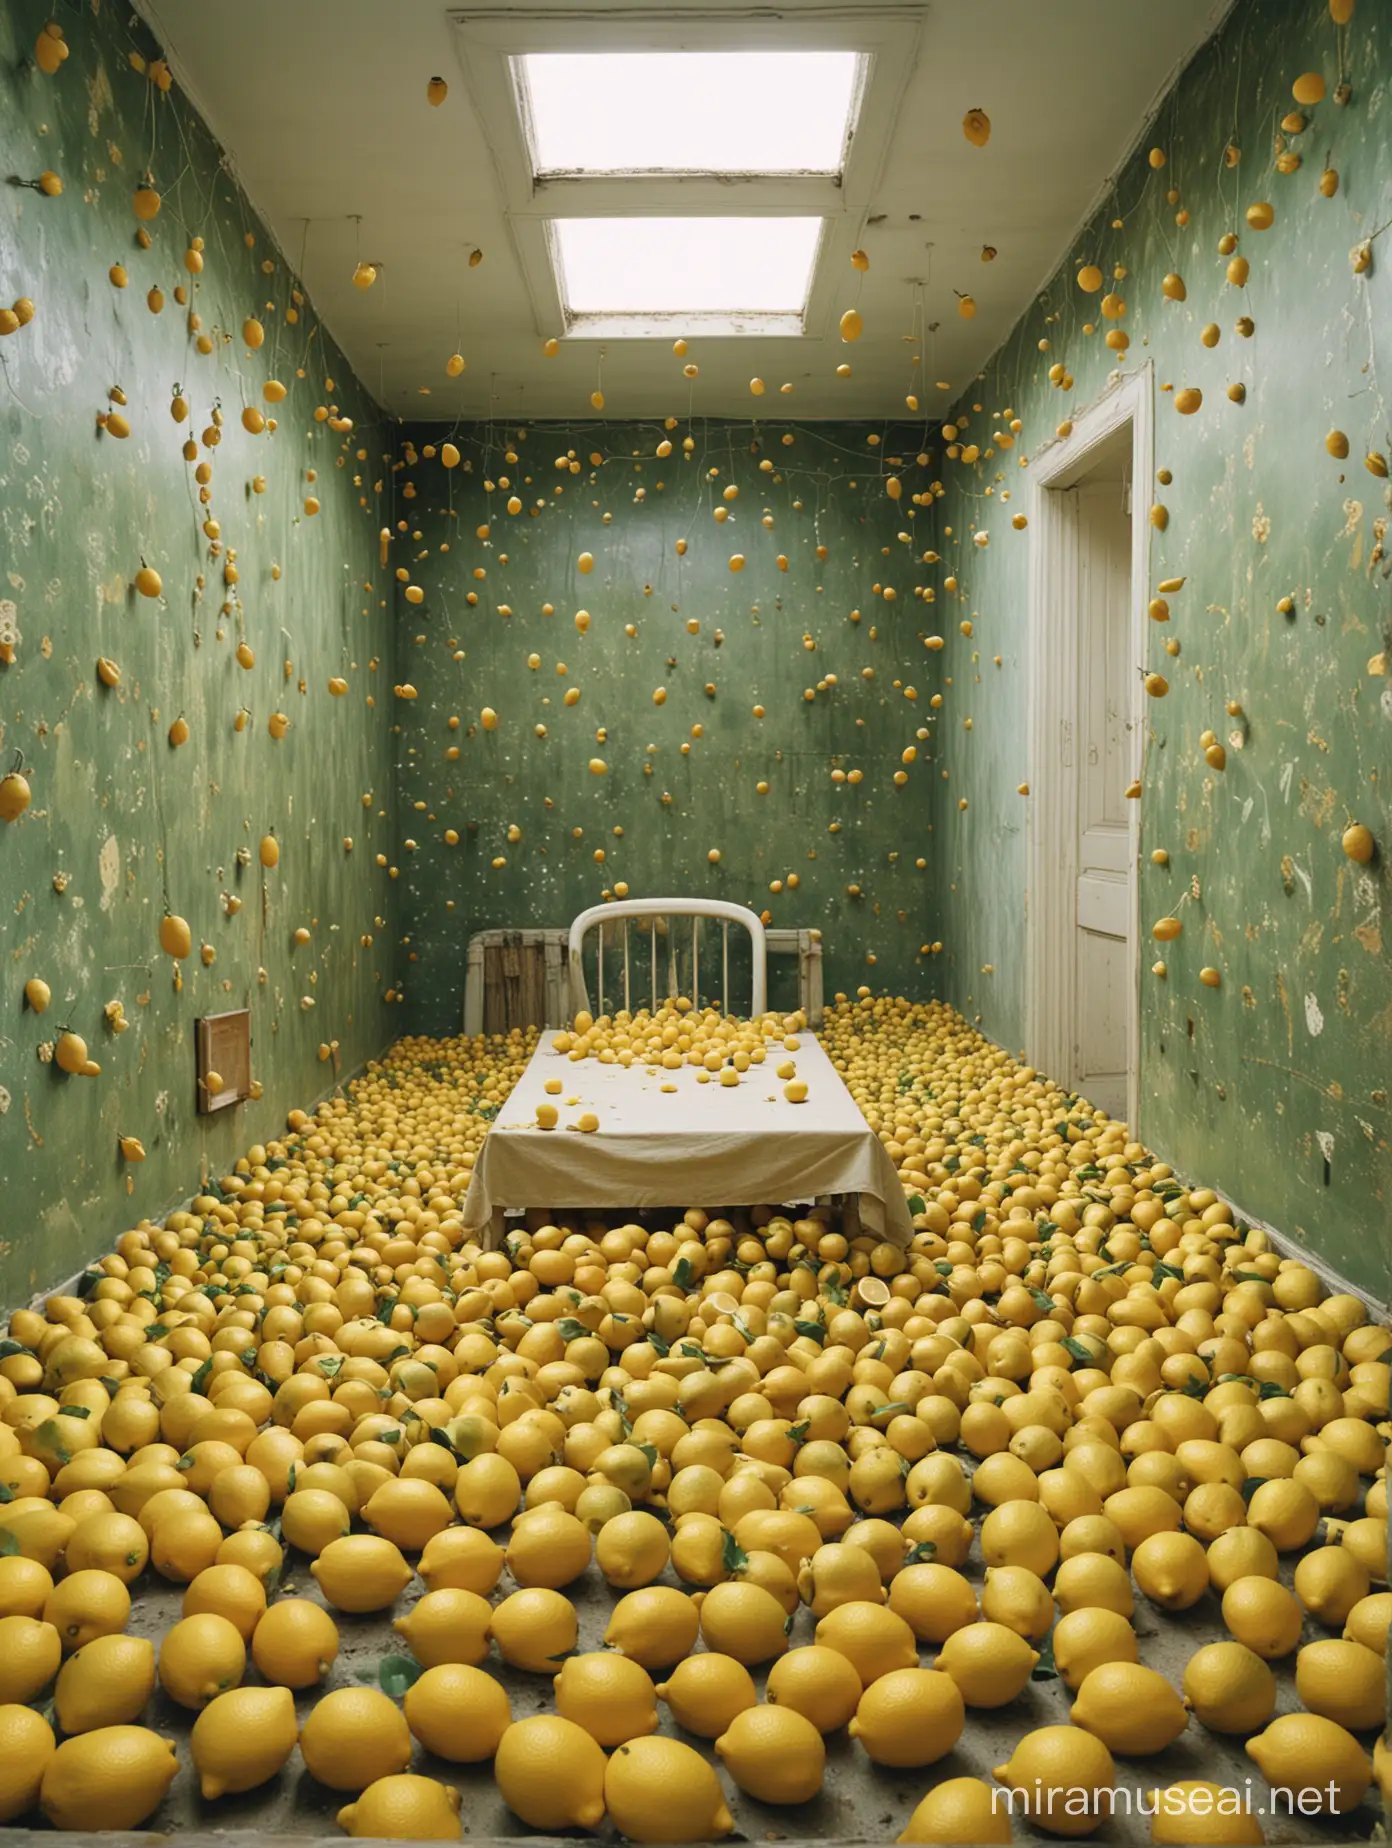 Nostalgic liminal space, dream like, surreal, early 2000, filled with lemons